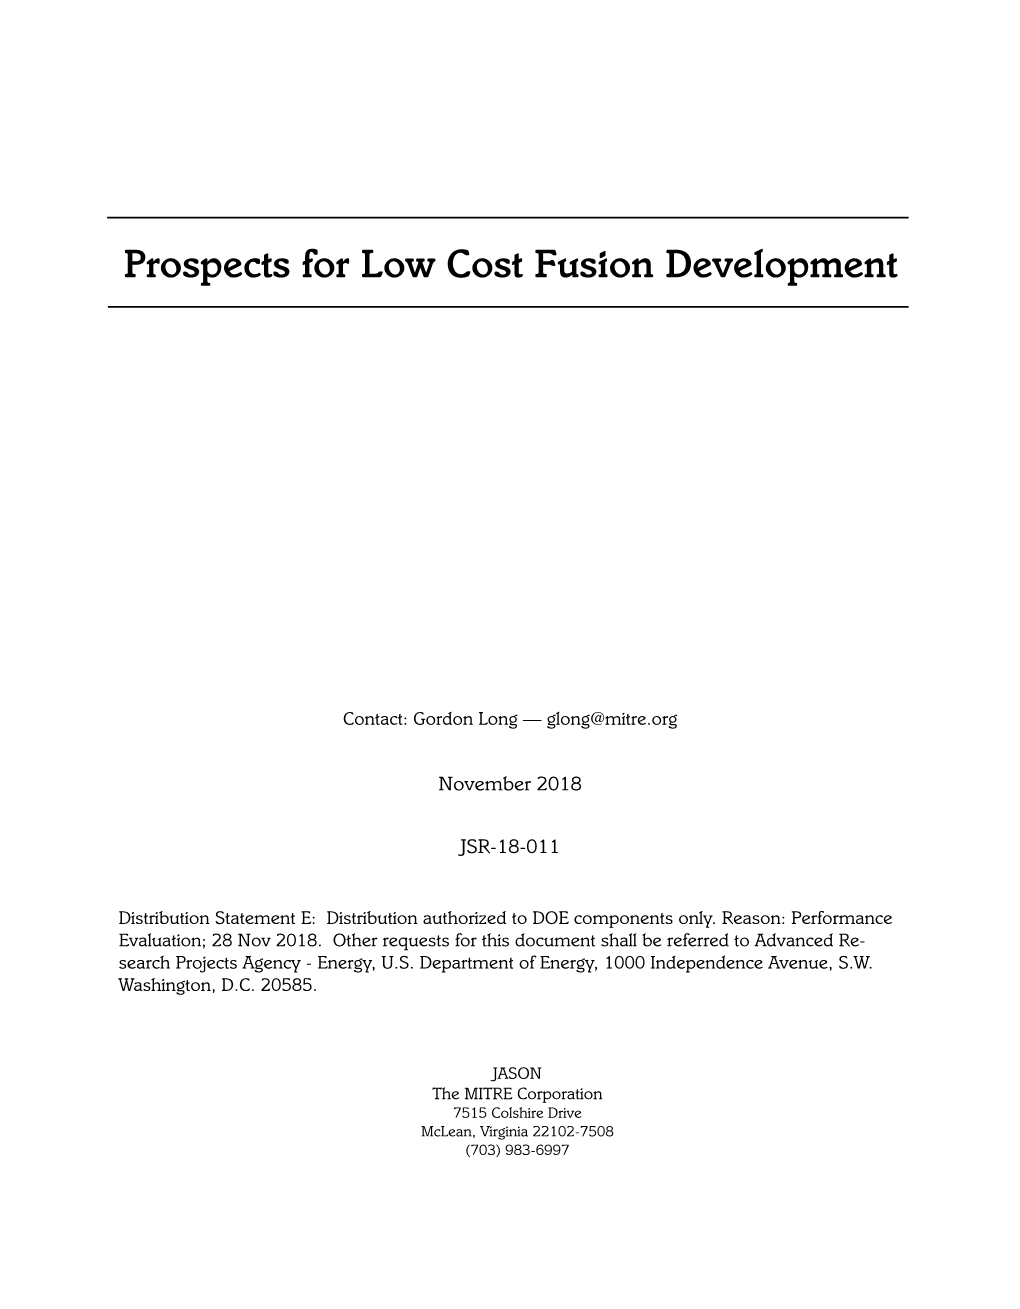 Prospects for Low Cost Fusion Development